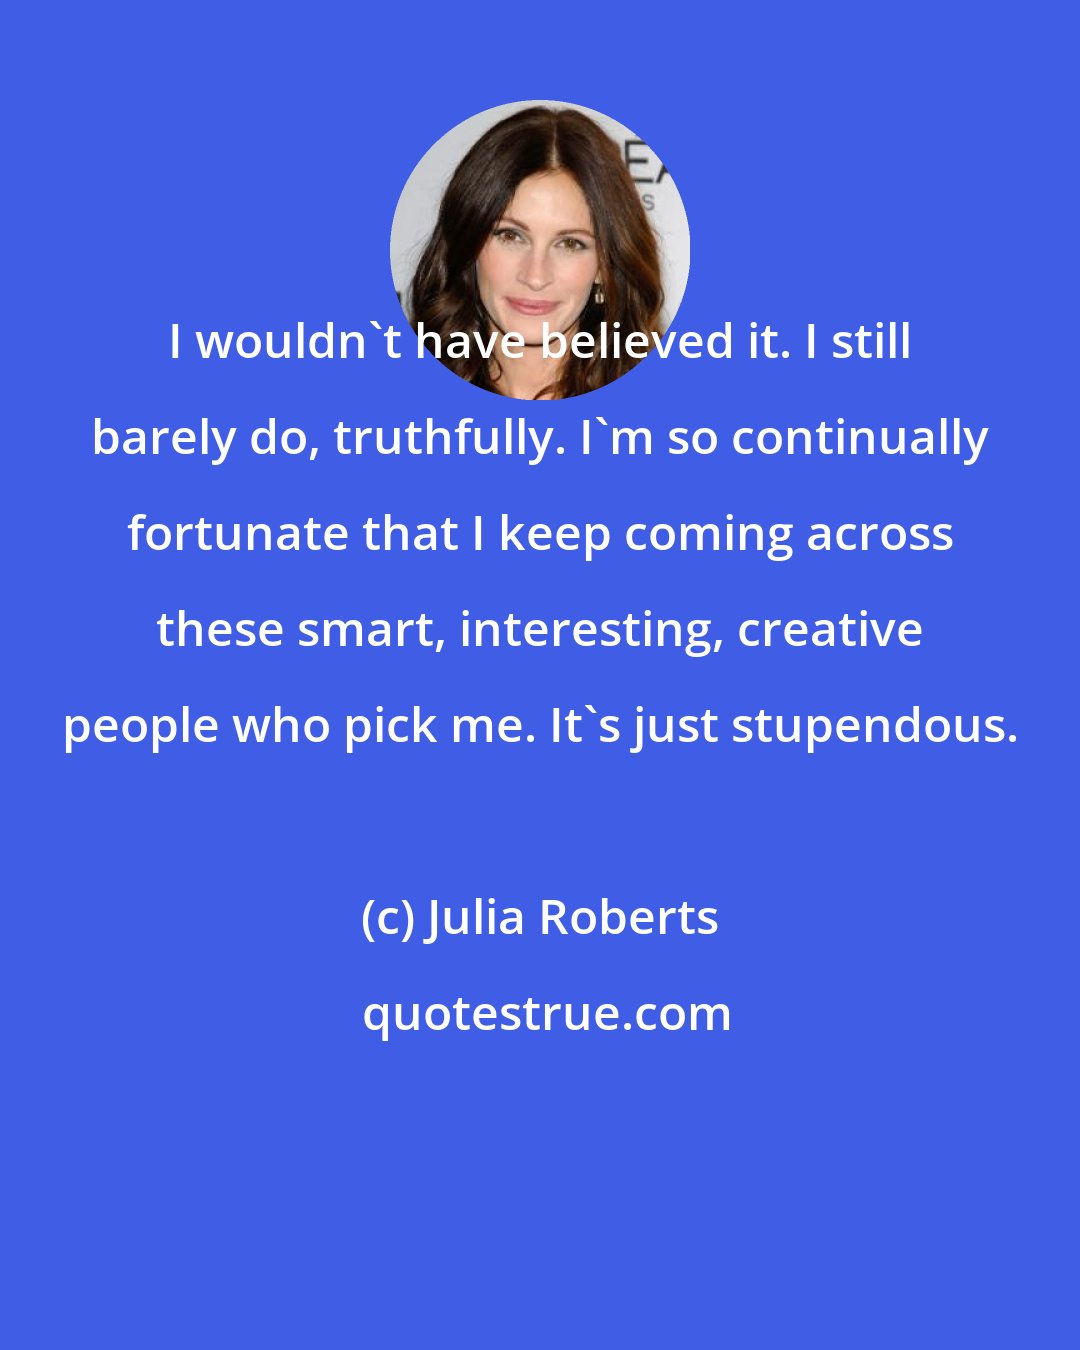 Julia Roberts: I wouldn't have believed it. I still barely do, truthfully. I'm so continually fortunate that I keep coming across these smart, interesting, creative people who pick me. It's just stupendous.